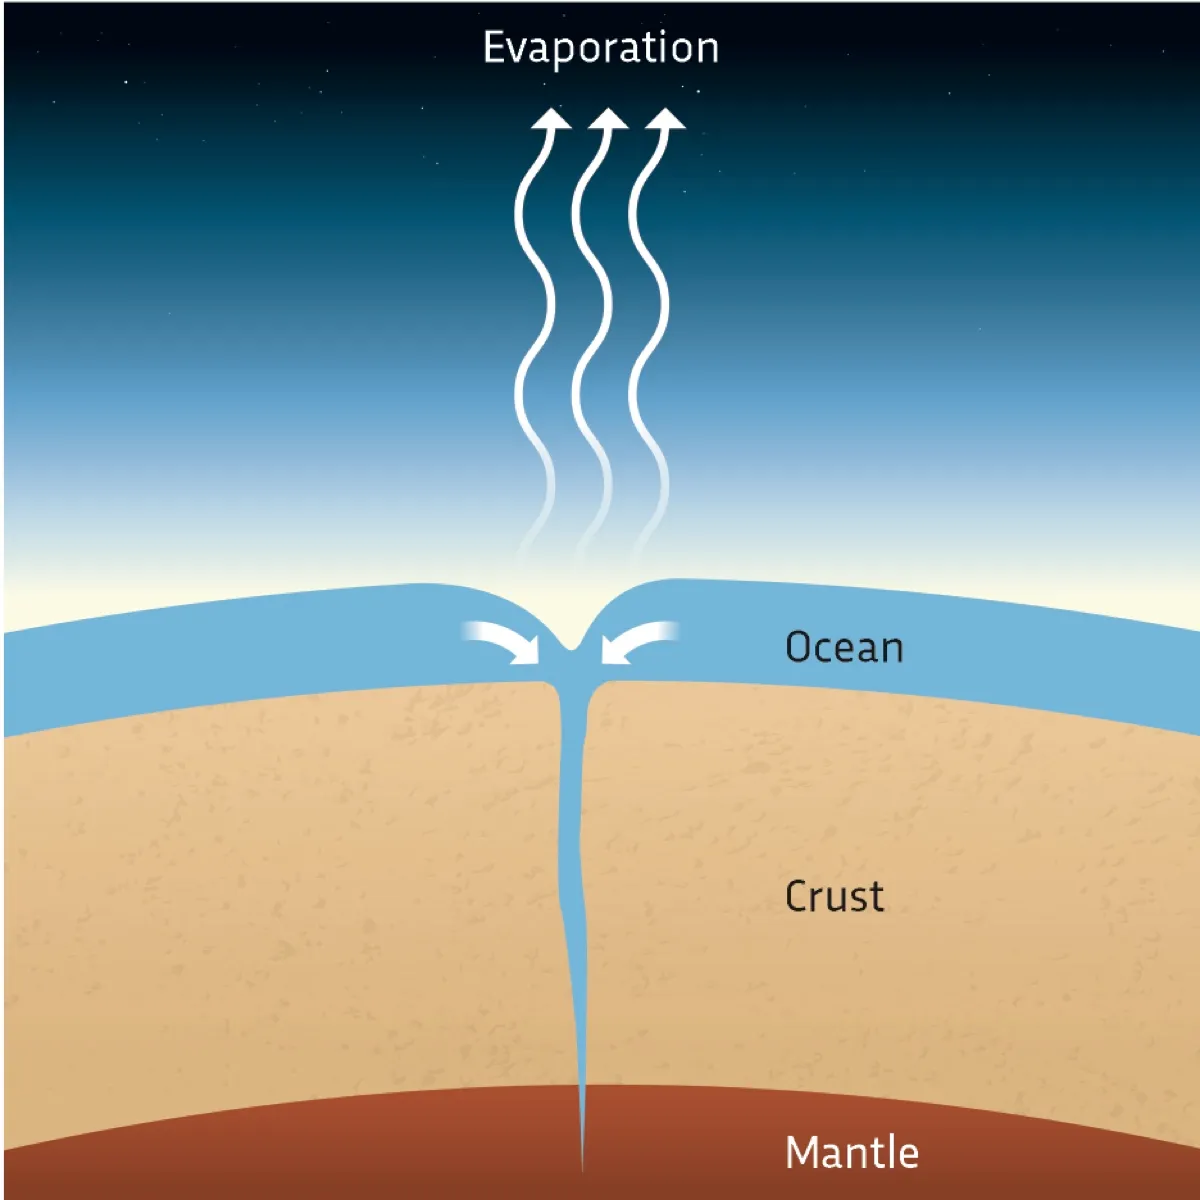 Alternatively, you could dig a hole at the bottom of the Pacific Ocean deep enough to drain all the water down into the mantle. If this boiled all the ocean into steam and jetted it into space, it might add an extra 1.5km/h to the Earth’s normal orbital speed of 108,000km/h.